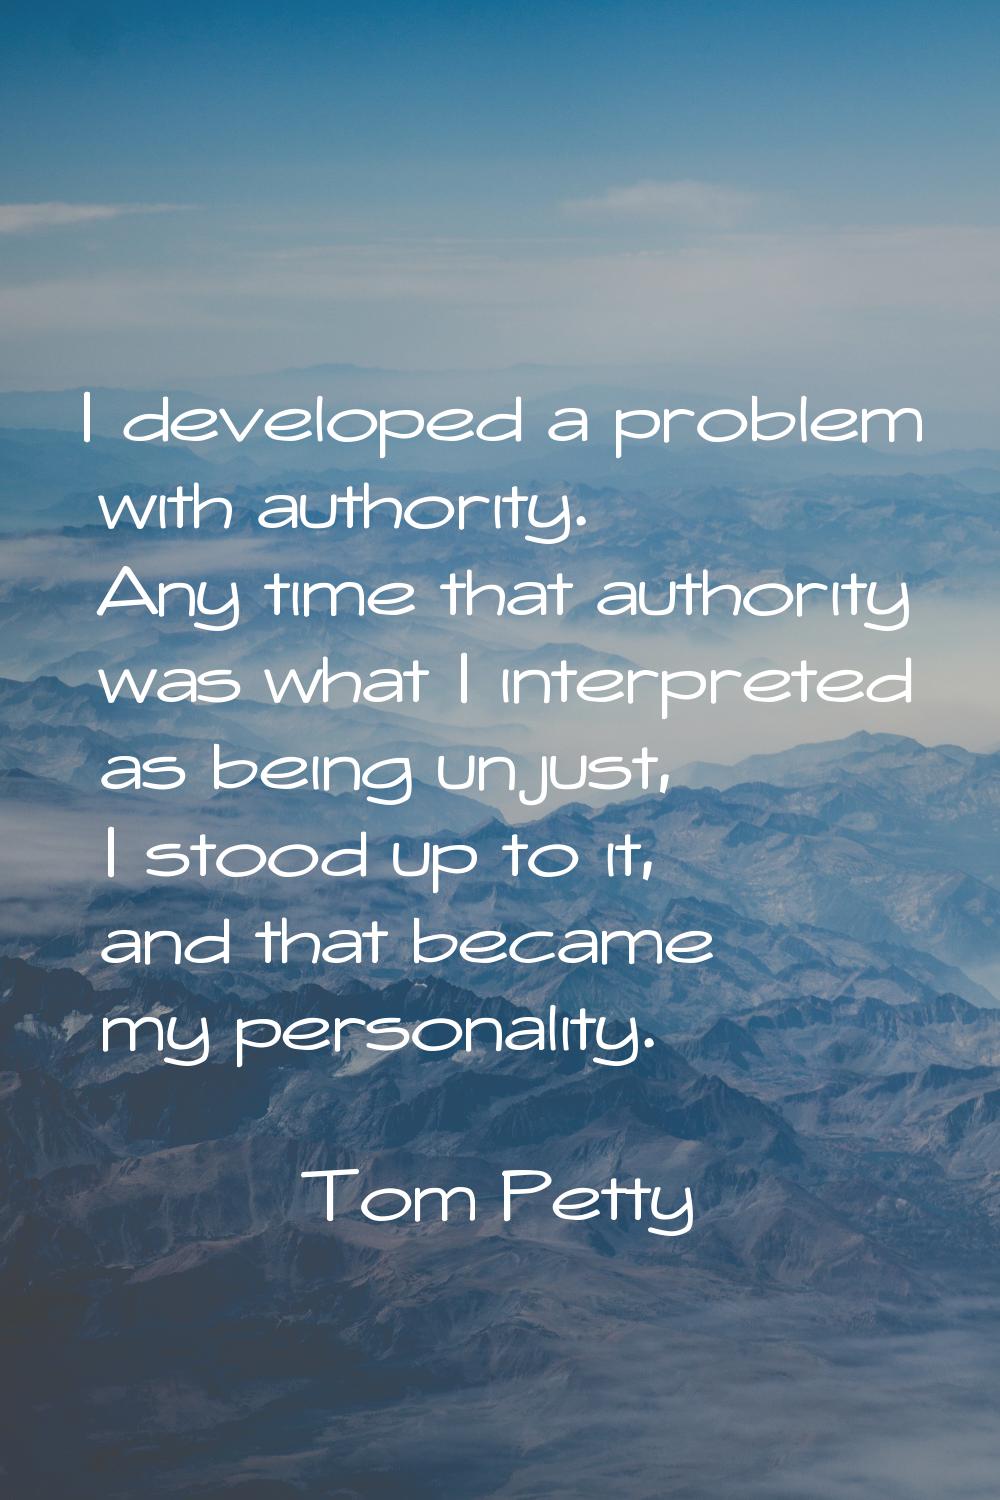 I developed a problem with authority. Any time that authority was what I interpreted as being unjus